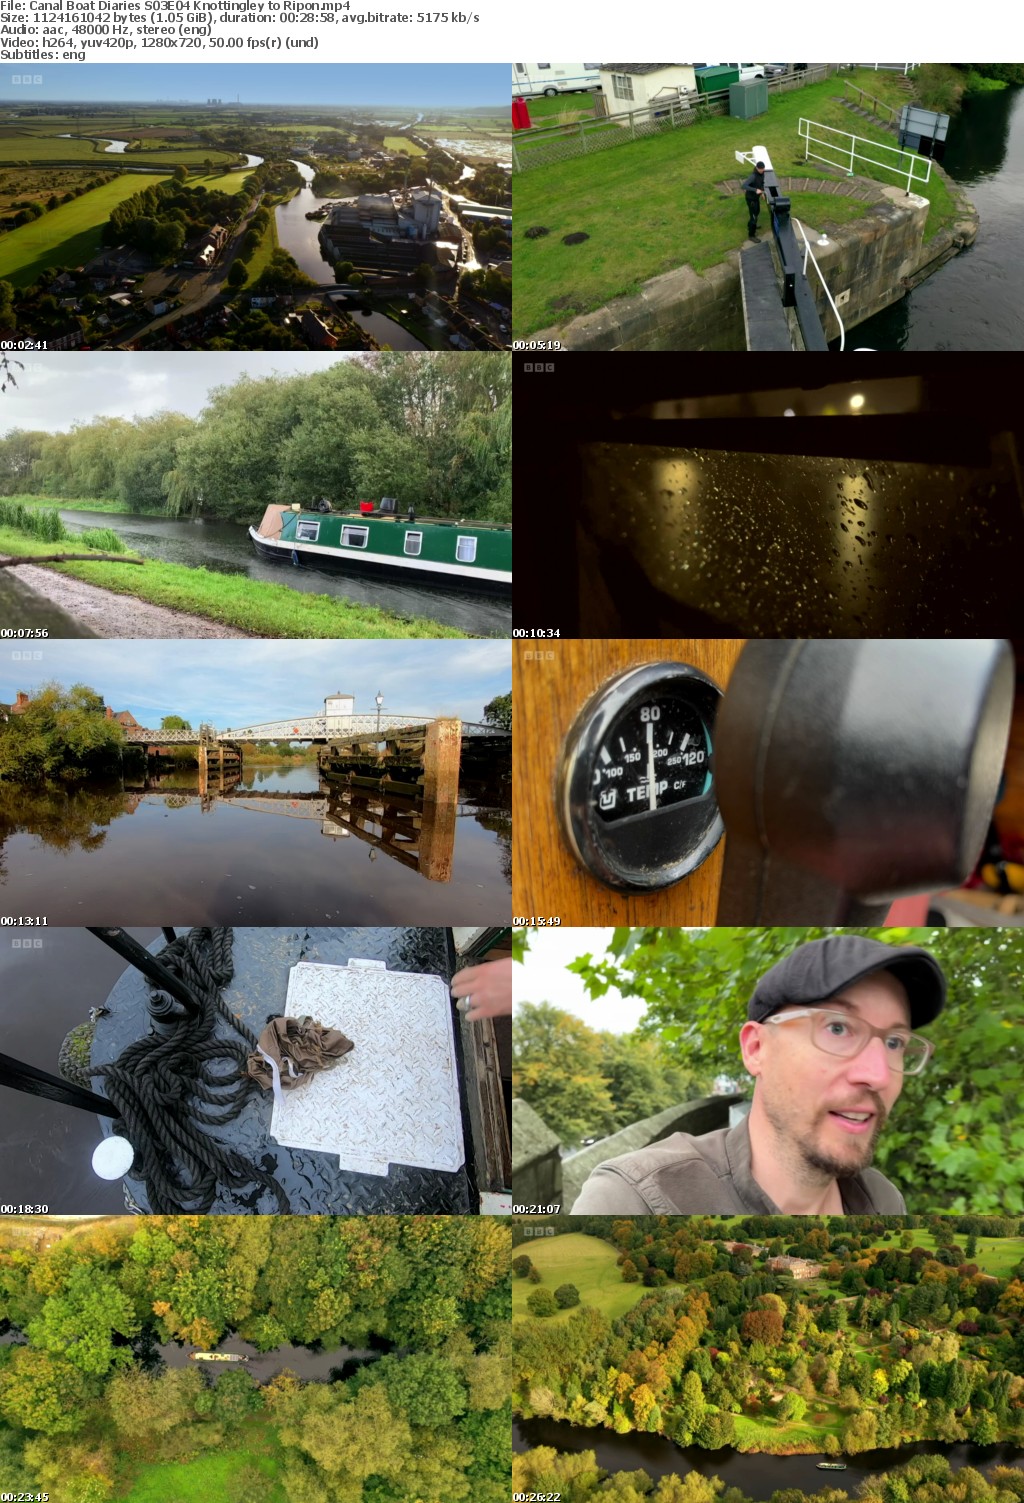 Canal Boat Diaries S03 complete (1280x720p HD, 50fps, soft Eng subs)